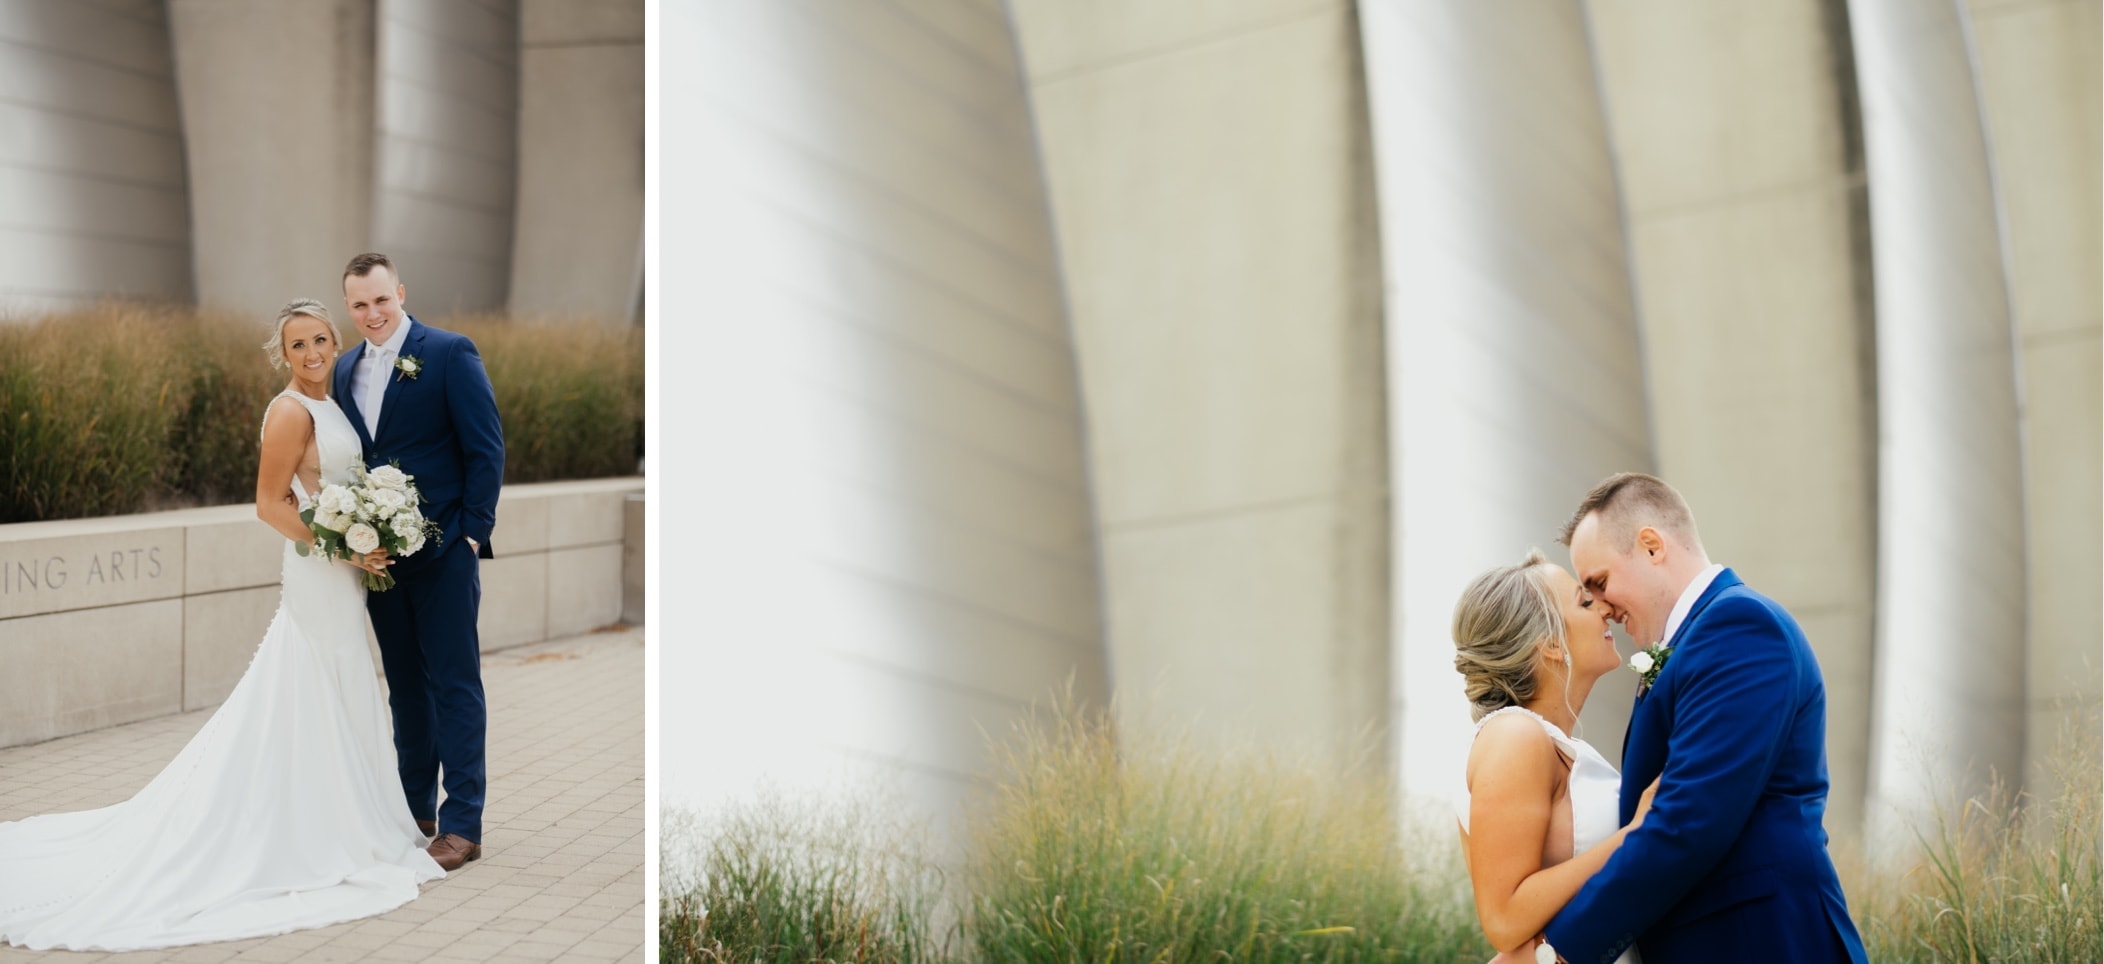 bride and groom at the kauffman center in kansas city